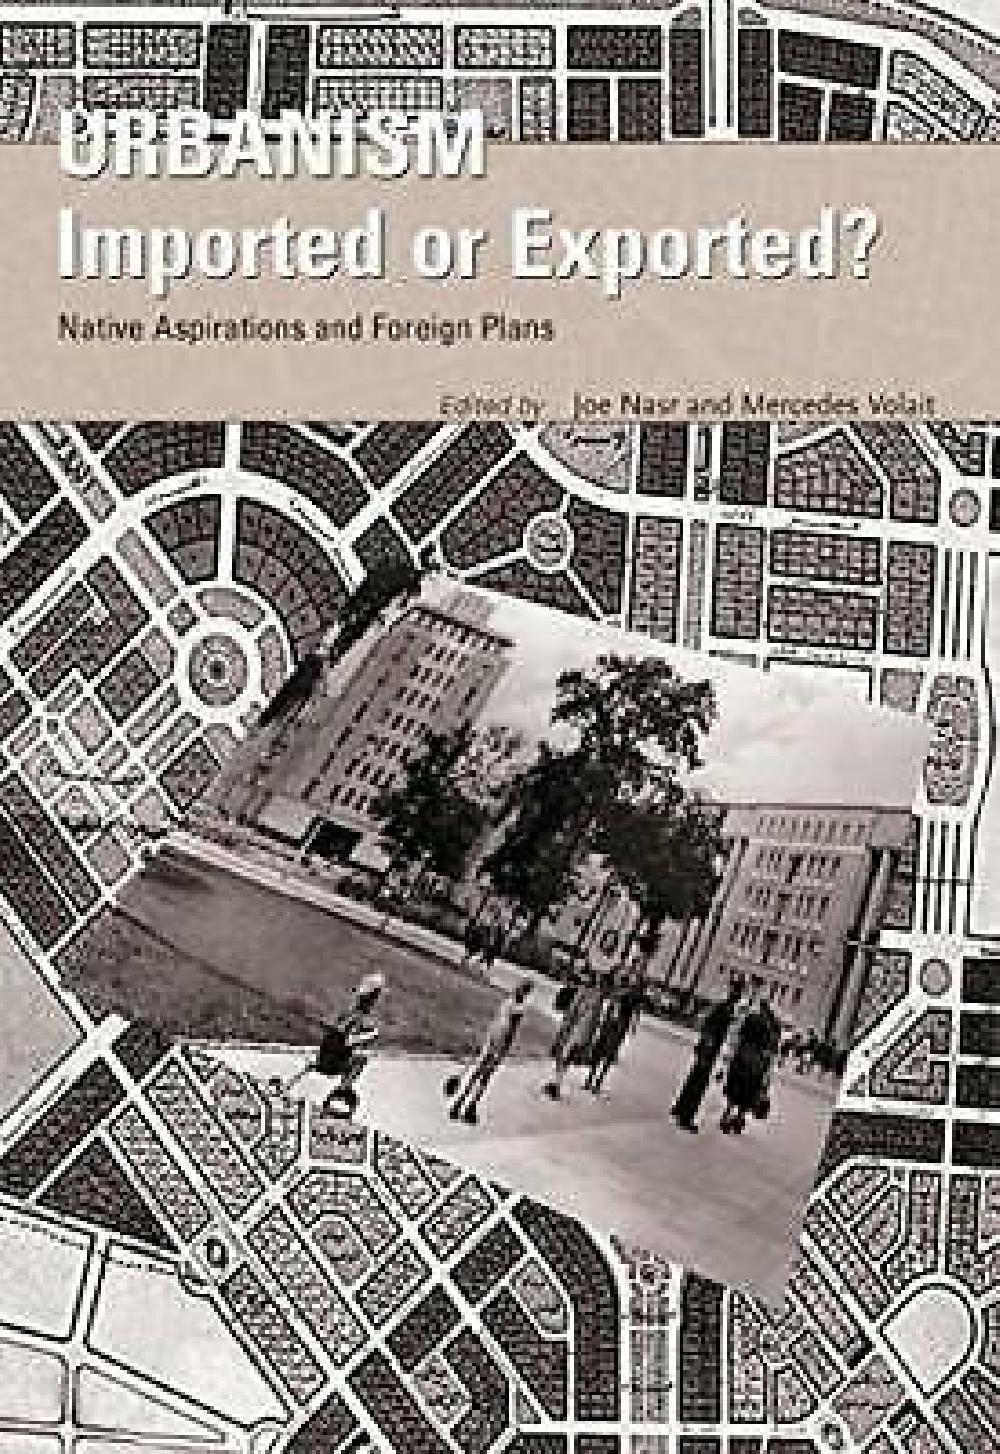 Urbanism imported or exported?